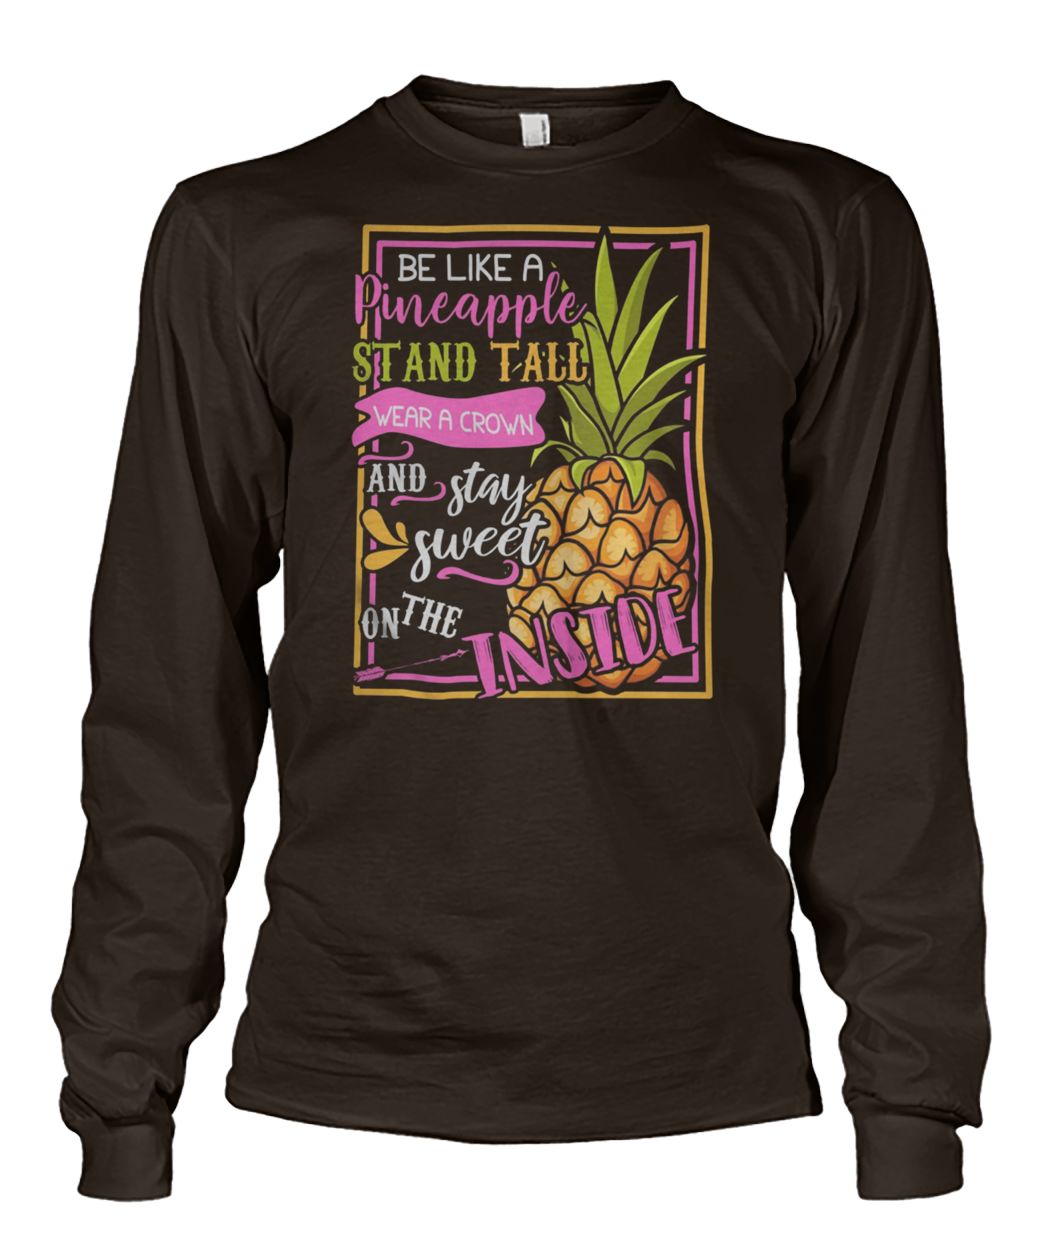 Be like a pineapple stand tall wear a crown unisex long sleeve